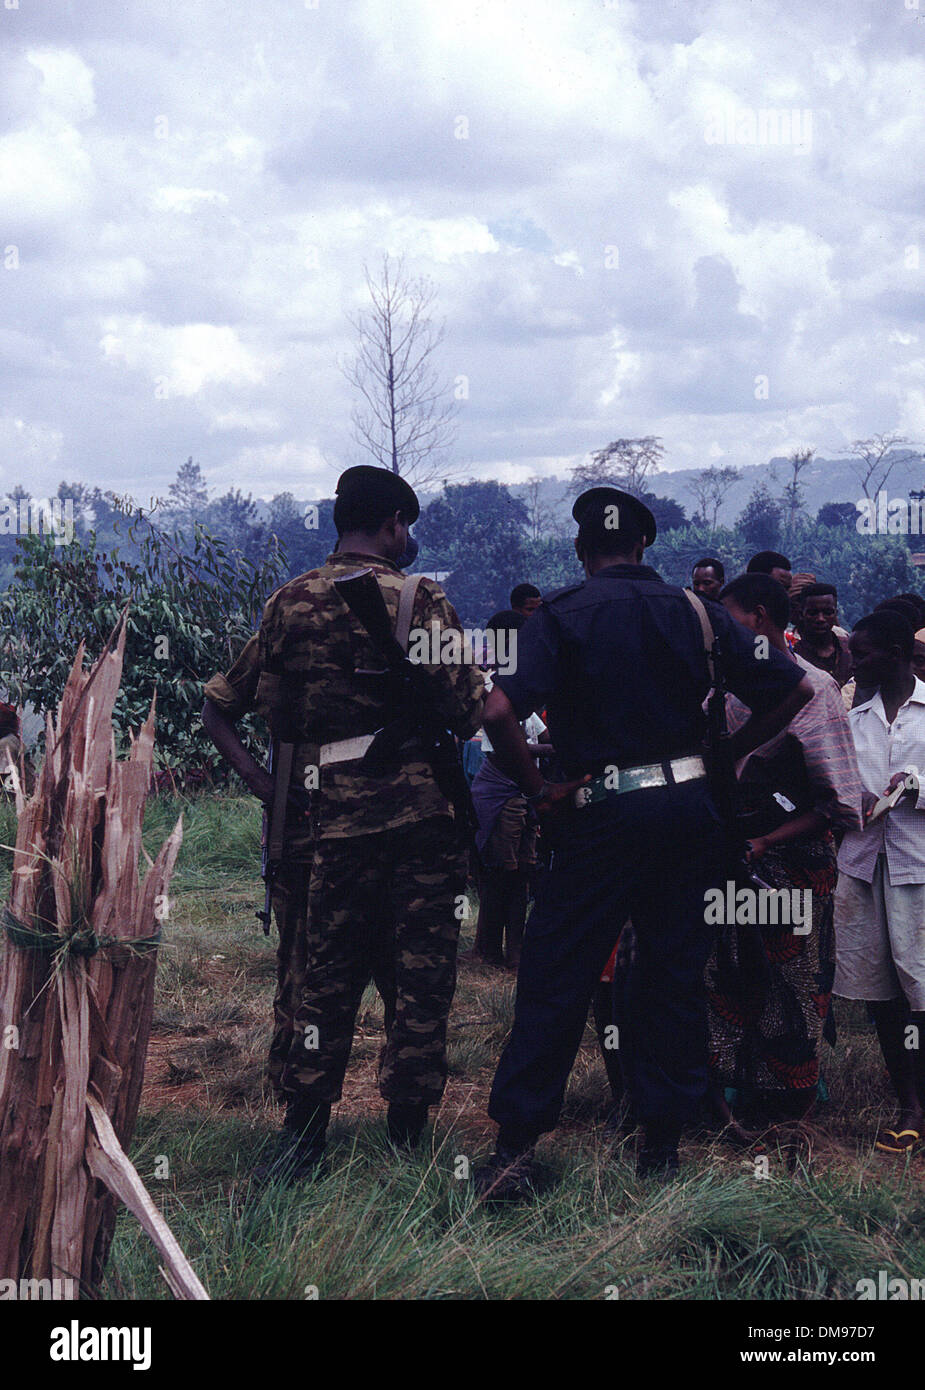 Apr 08, 1994 - Burundi, Rwanda - Burundi authorities try to check documents as Rwandan Tutsi refugees flee across the border into Burundi in April 1994 as the Hutus commited genocide in a 100 day civil war. The Rwandan Genocide was the 1994 mass murder of an estimated 800,000 people in the small East African nation of Rwanda. Over the course of approximately 100 days from the assas Stock Photo